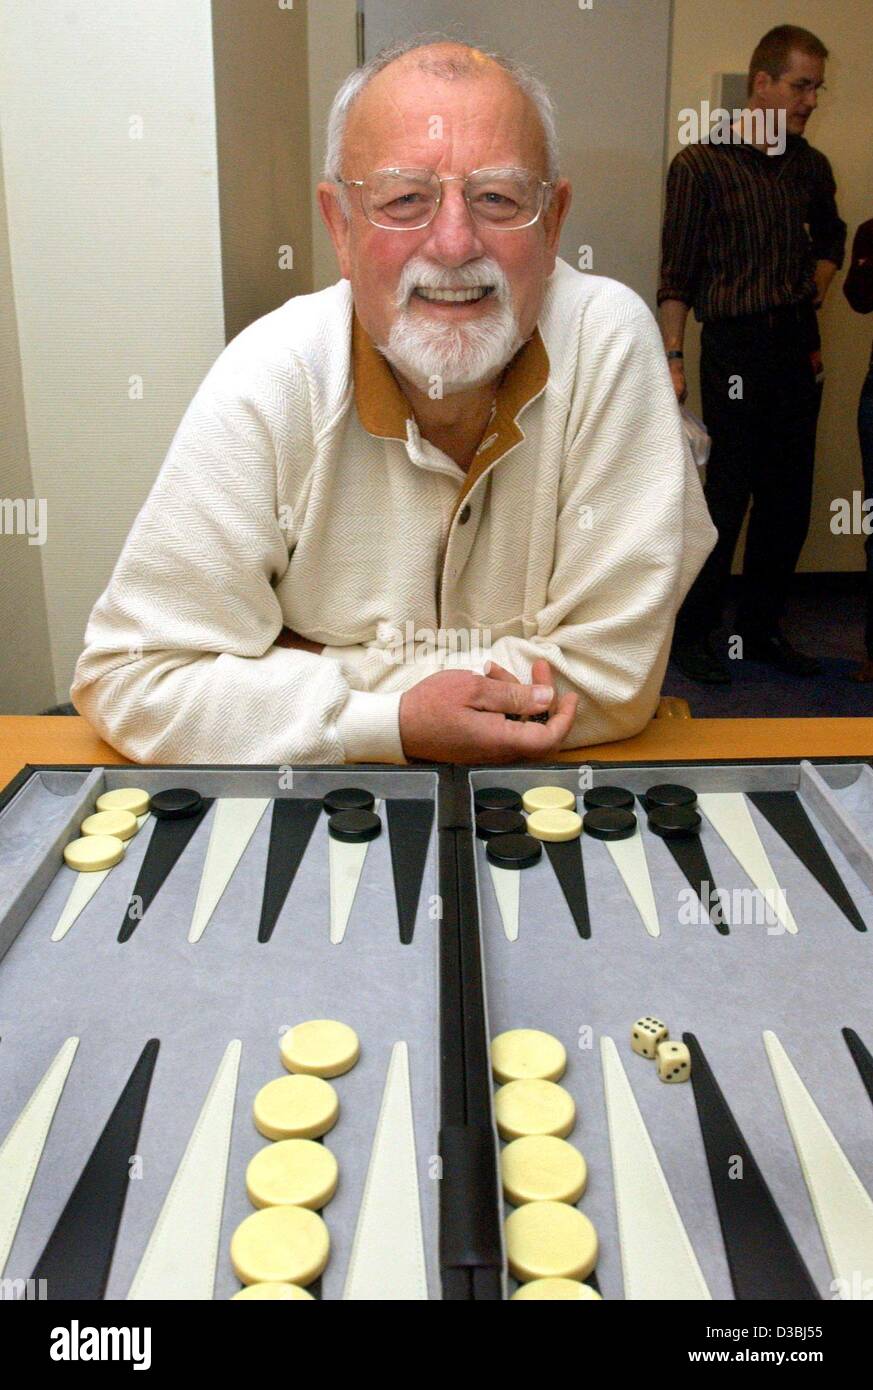 (dpa) - The British singer and entertainer Roger Whittaker relaxes before his concert by playing backgammon, Suhl, Germany, 23 April 2003. The 67-year-old will tour Germany and Austria and present his new album 'mehr denn je' (more than ever). Stock Photo